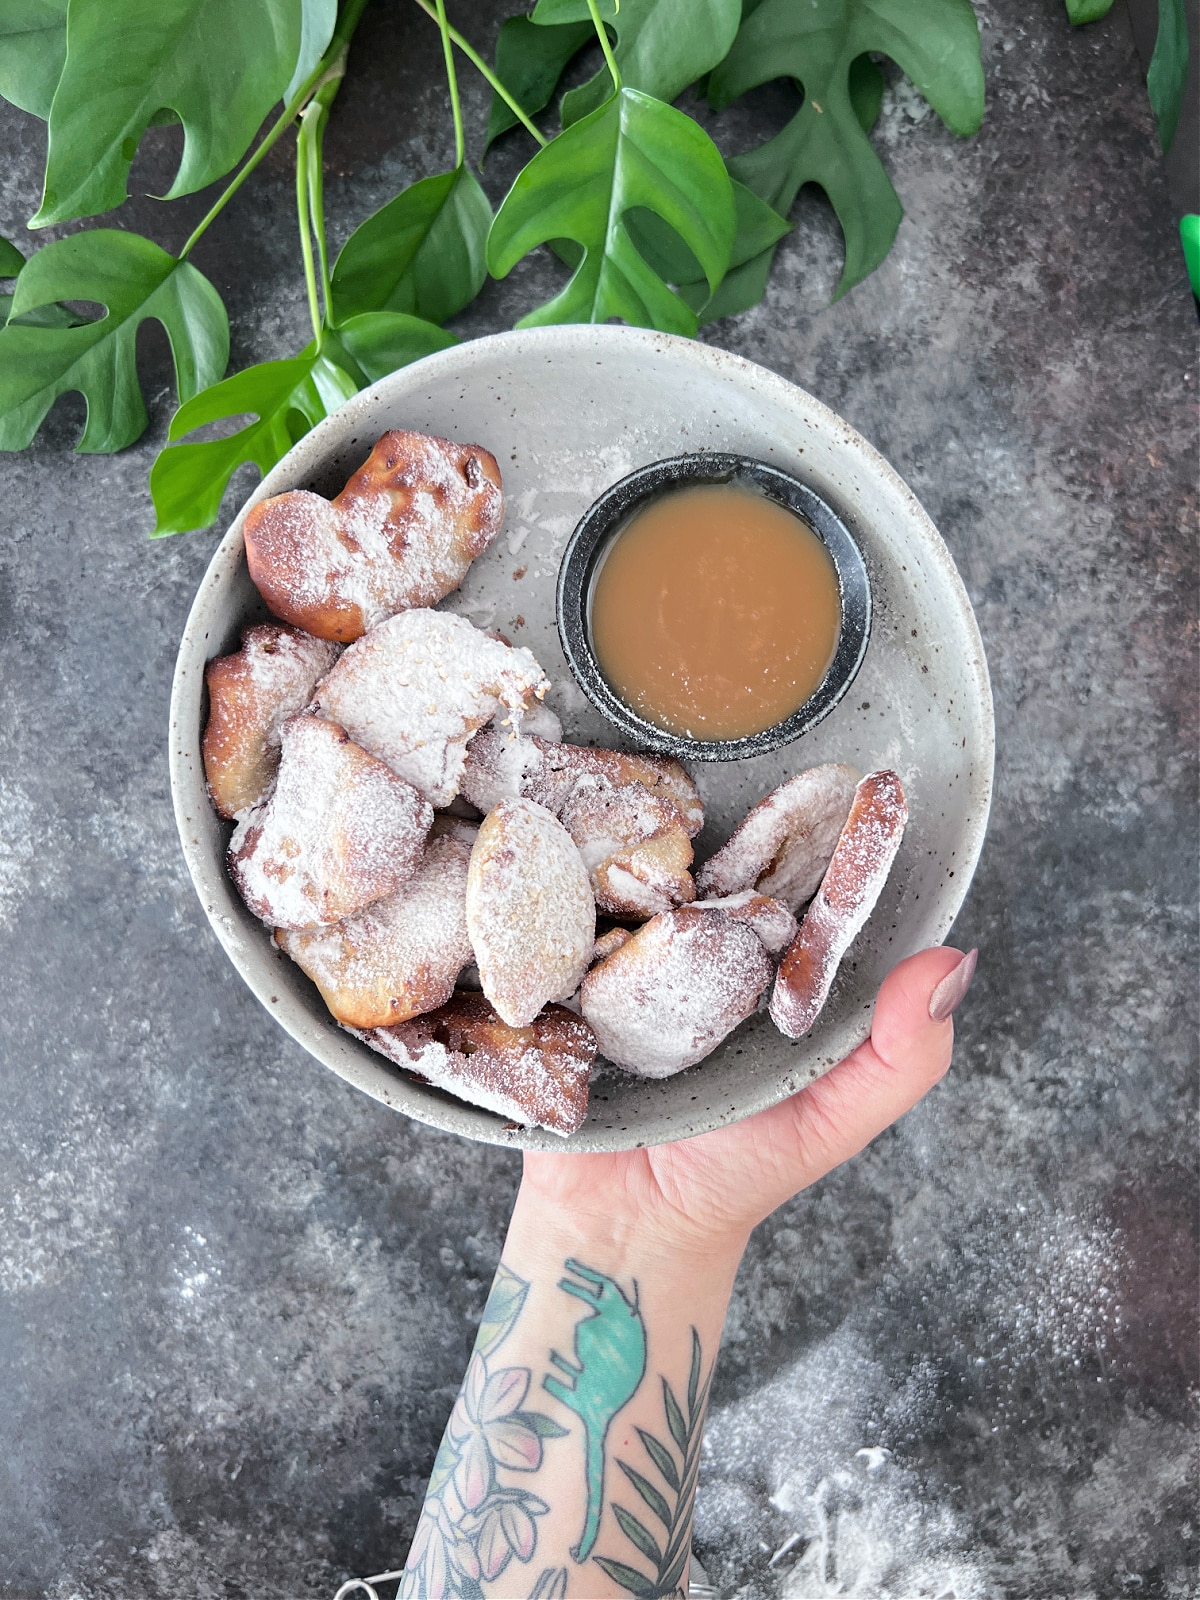 A hand holds a shallow bowl of banana fritters dusted with powdered sugar. A smaller bowl of caramel sauce sits in the fritter bowl. The arm has tattoos of foliage and a dinosaur.